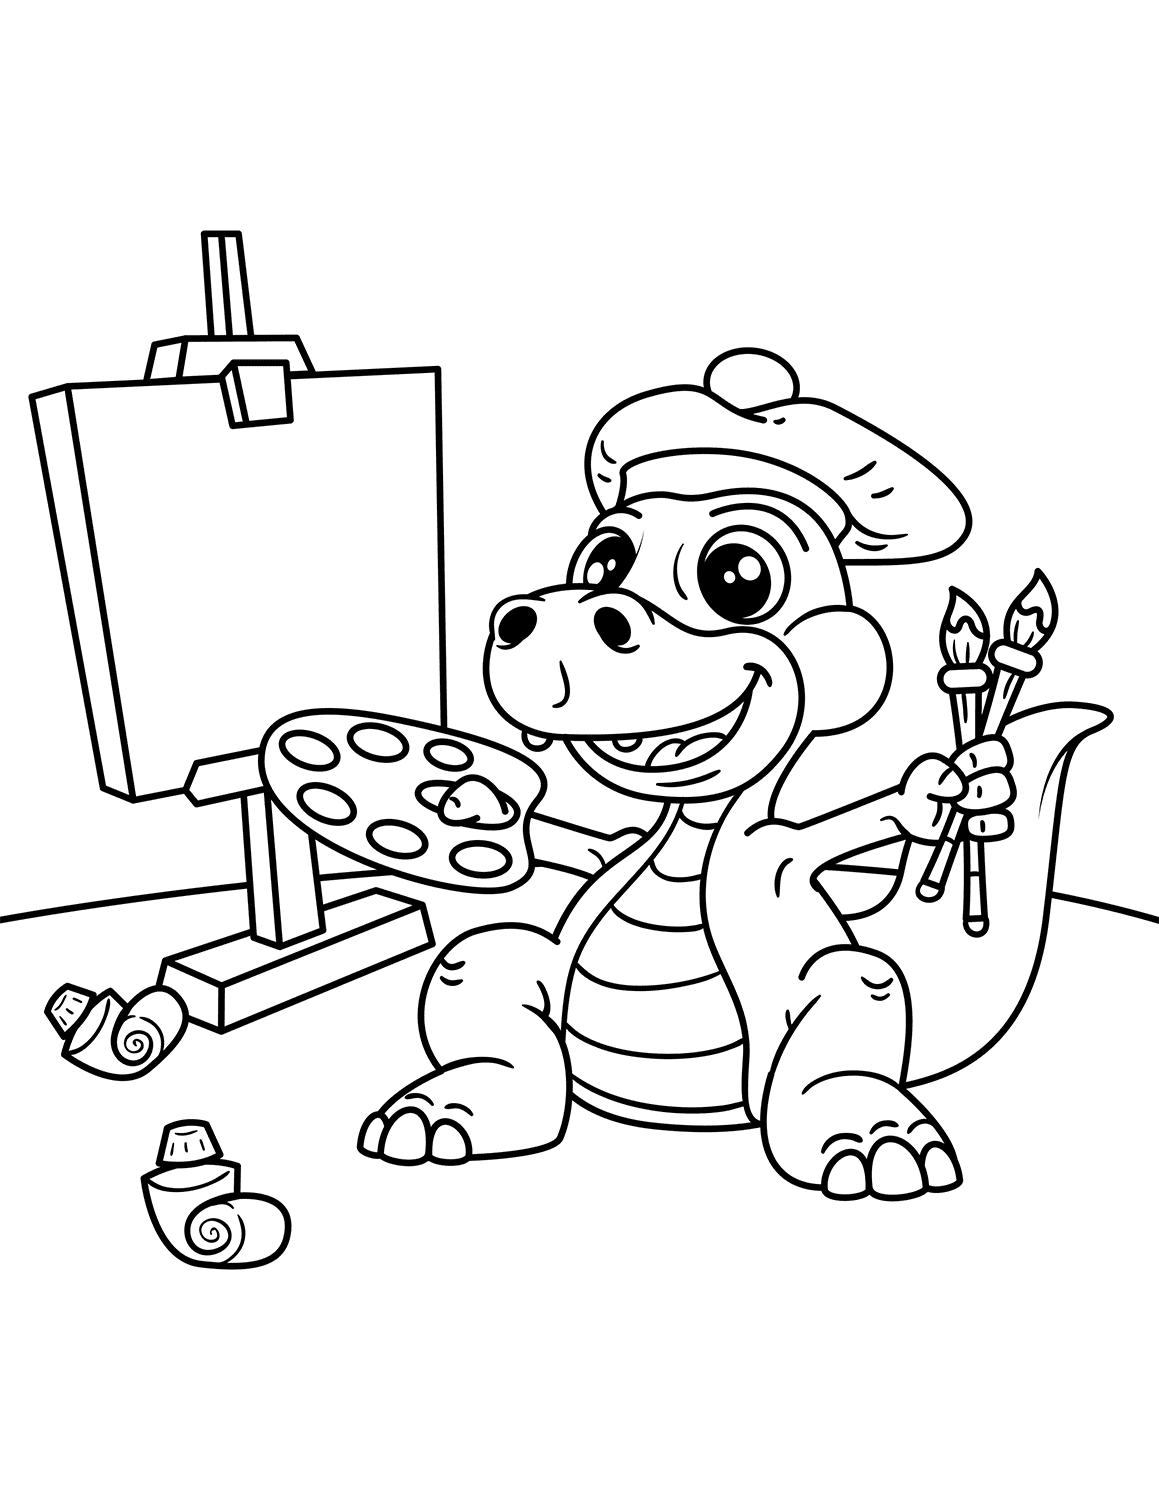 Cute Dinosaur Artist With Easel Brush And Pallete Of Colors Coloring Pages